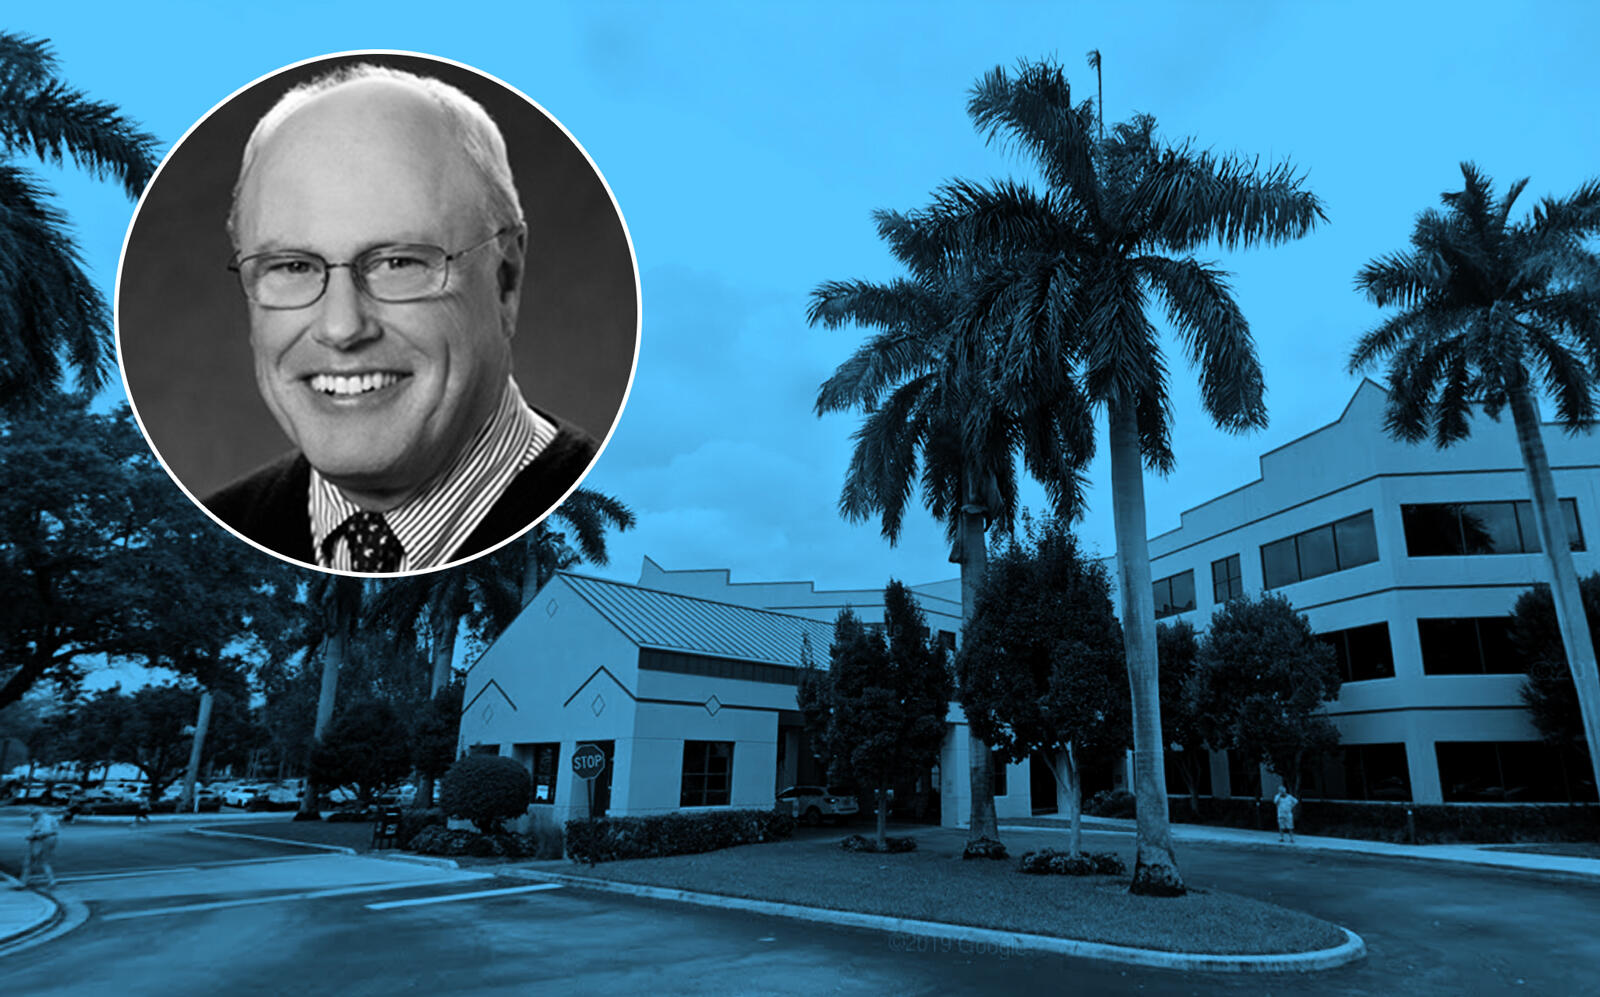 1905 Clint Moore Road in Boca Raton with Healthcare Trust of America interim President and CEO Peter Foss (Google Maps, Healthcare Trust of America)